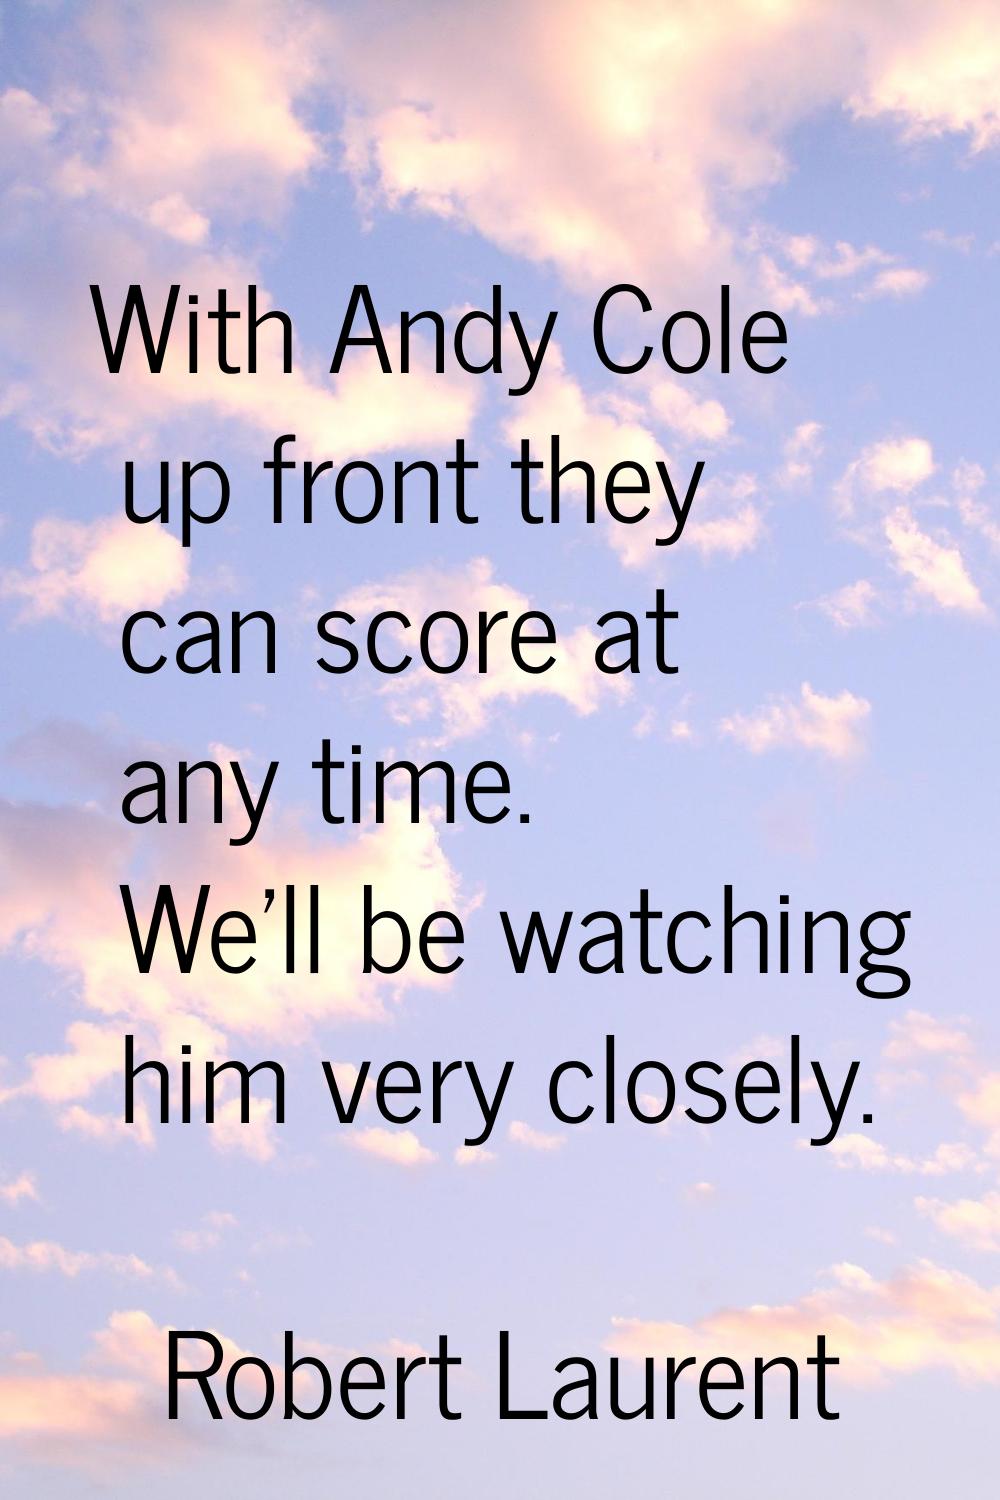 With Andy Cole up front they can score at any time. We'll be watching him very closely.